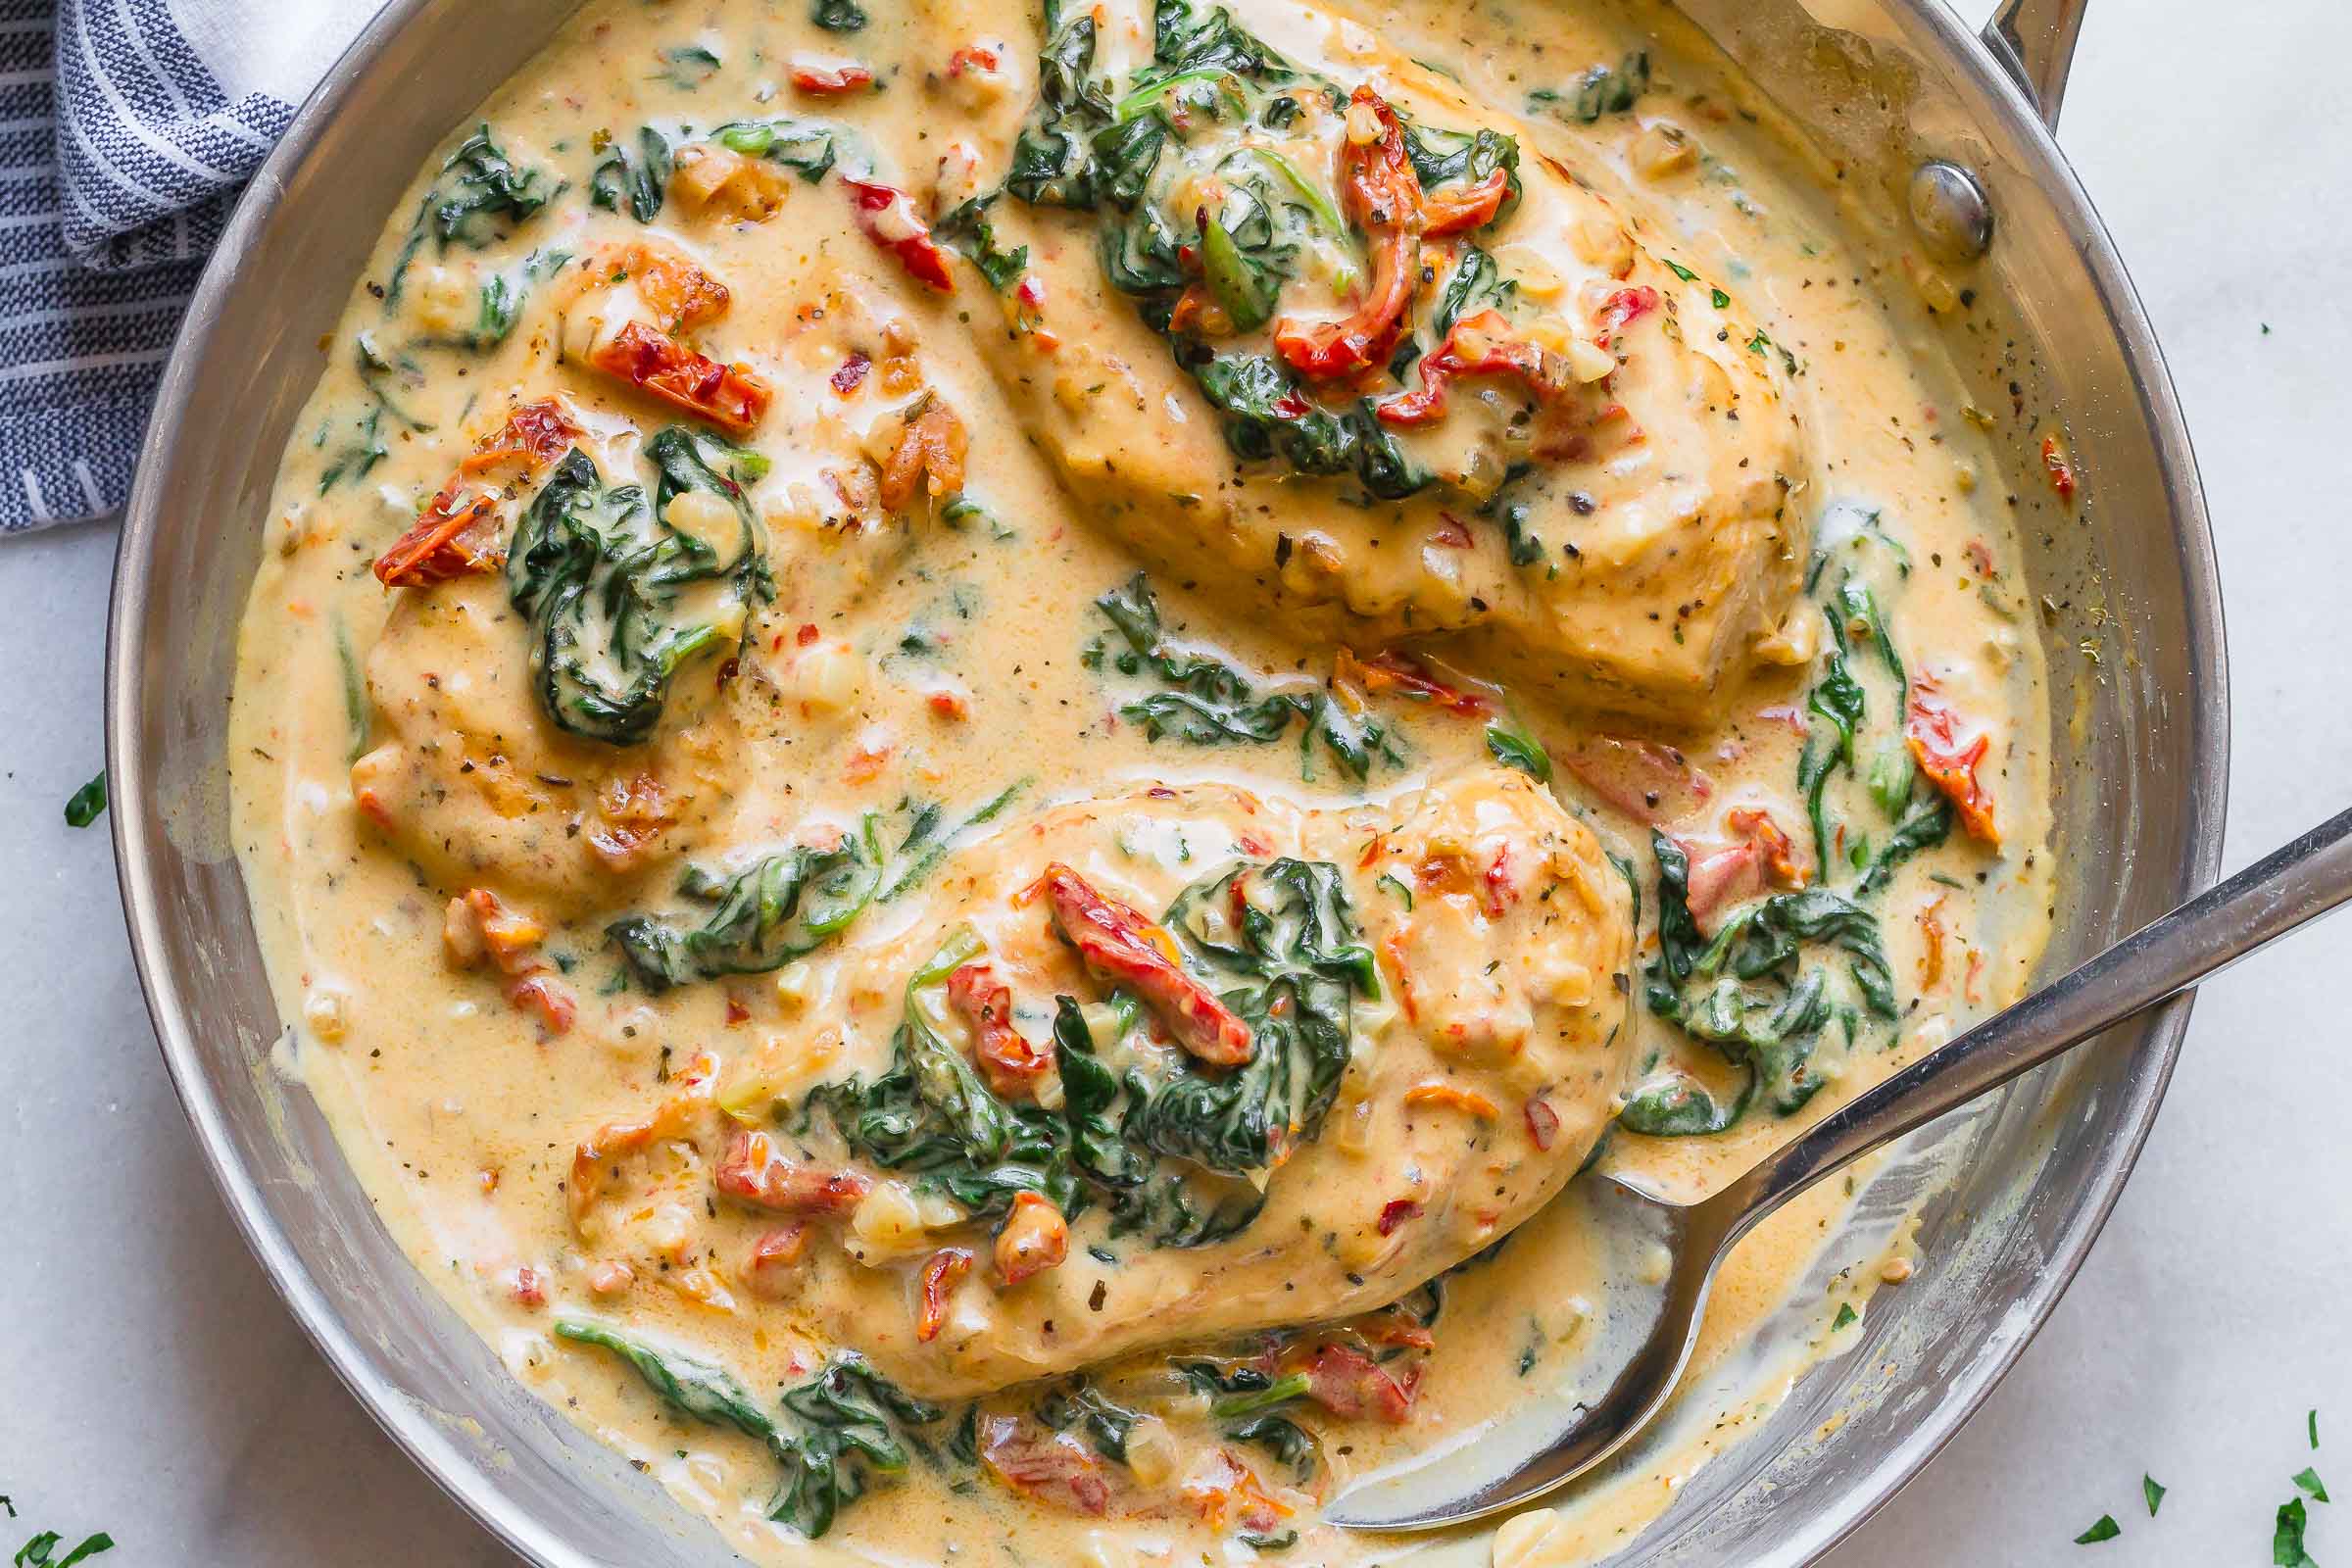 Recipe of Recipes With Chicken And Spinach